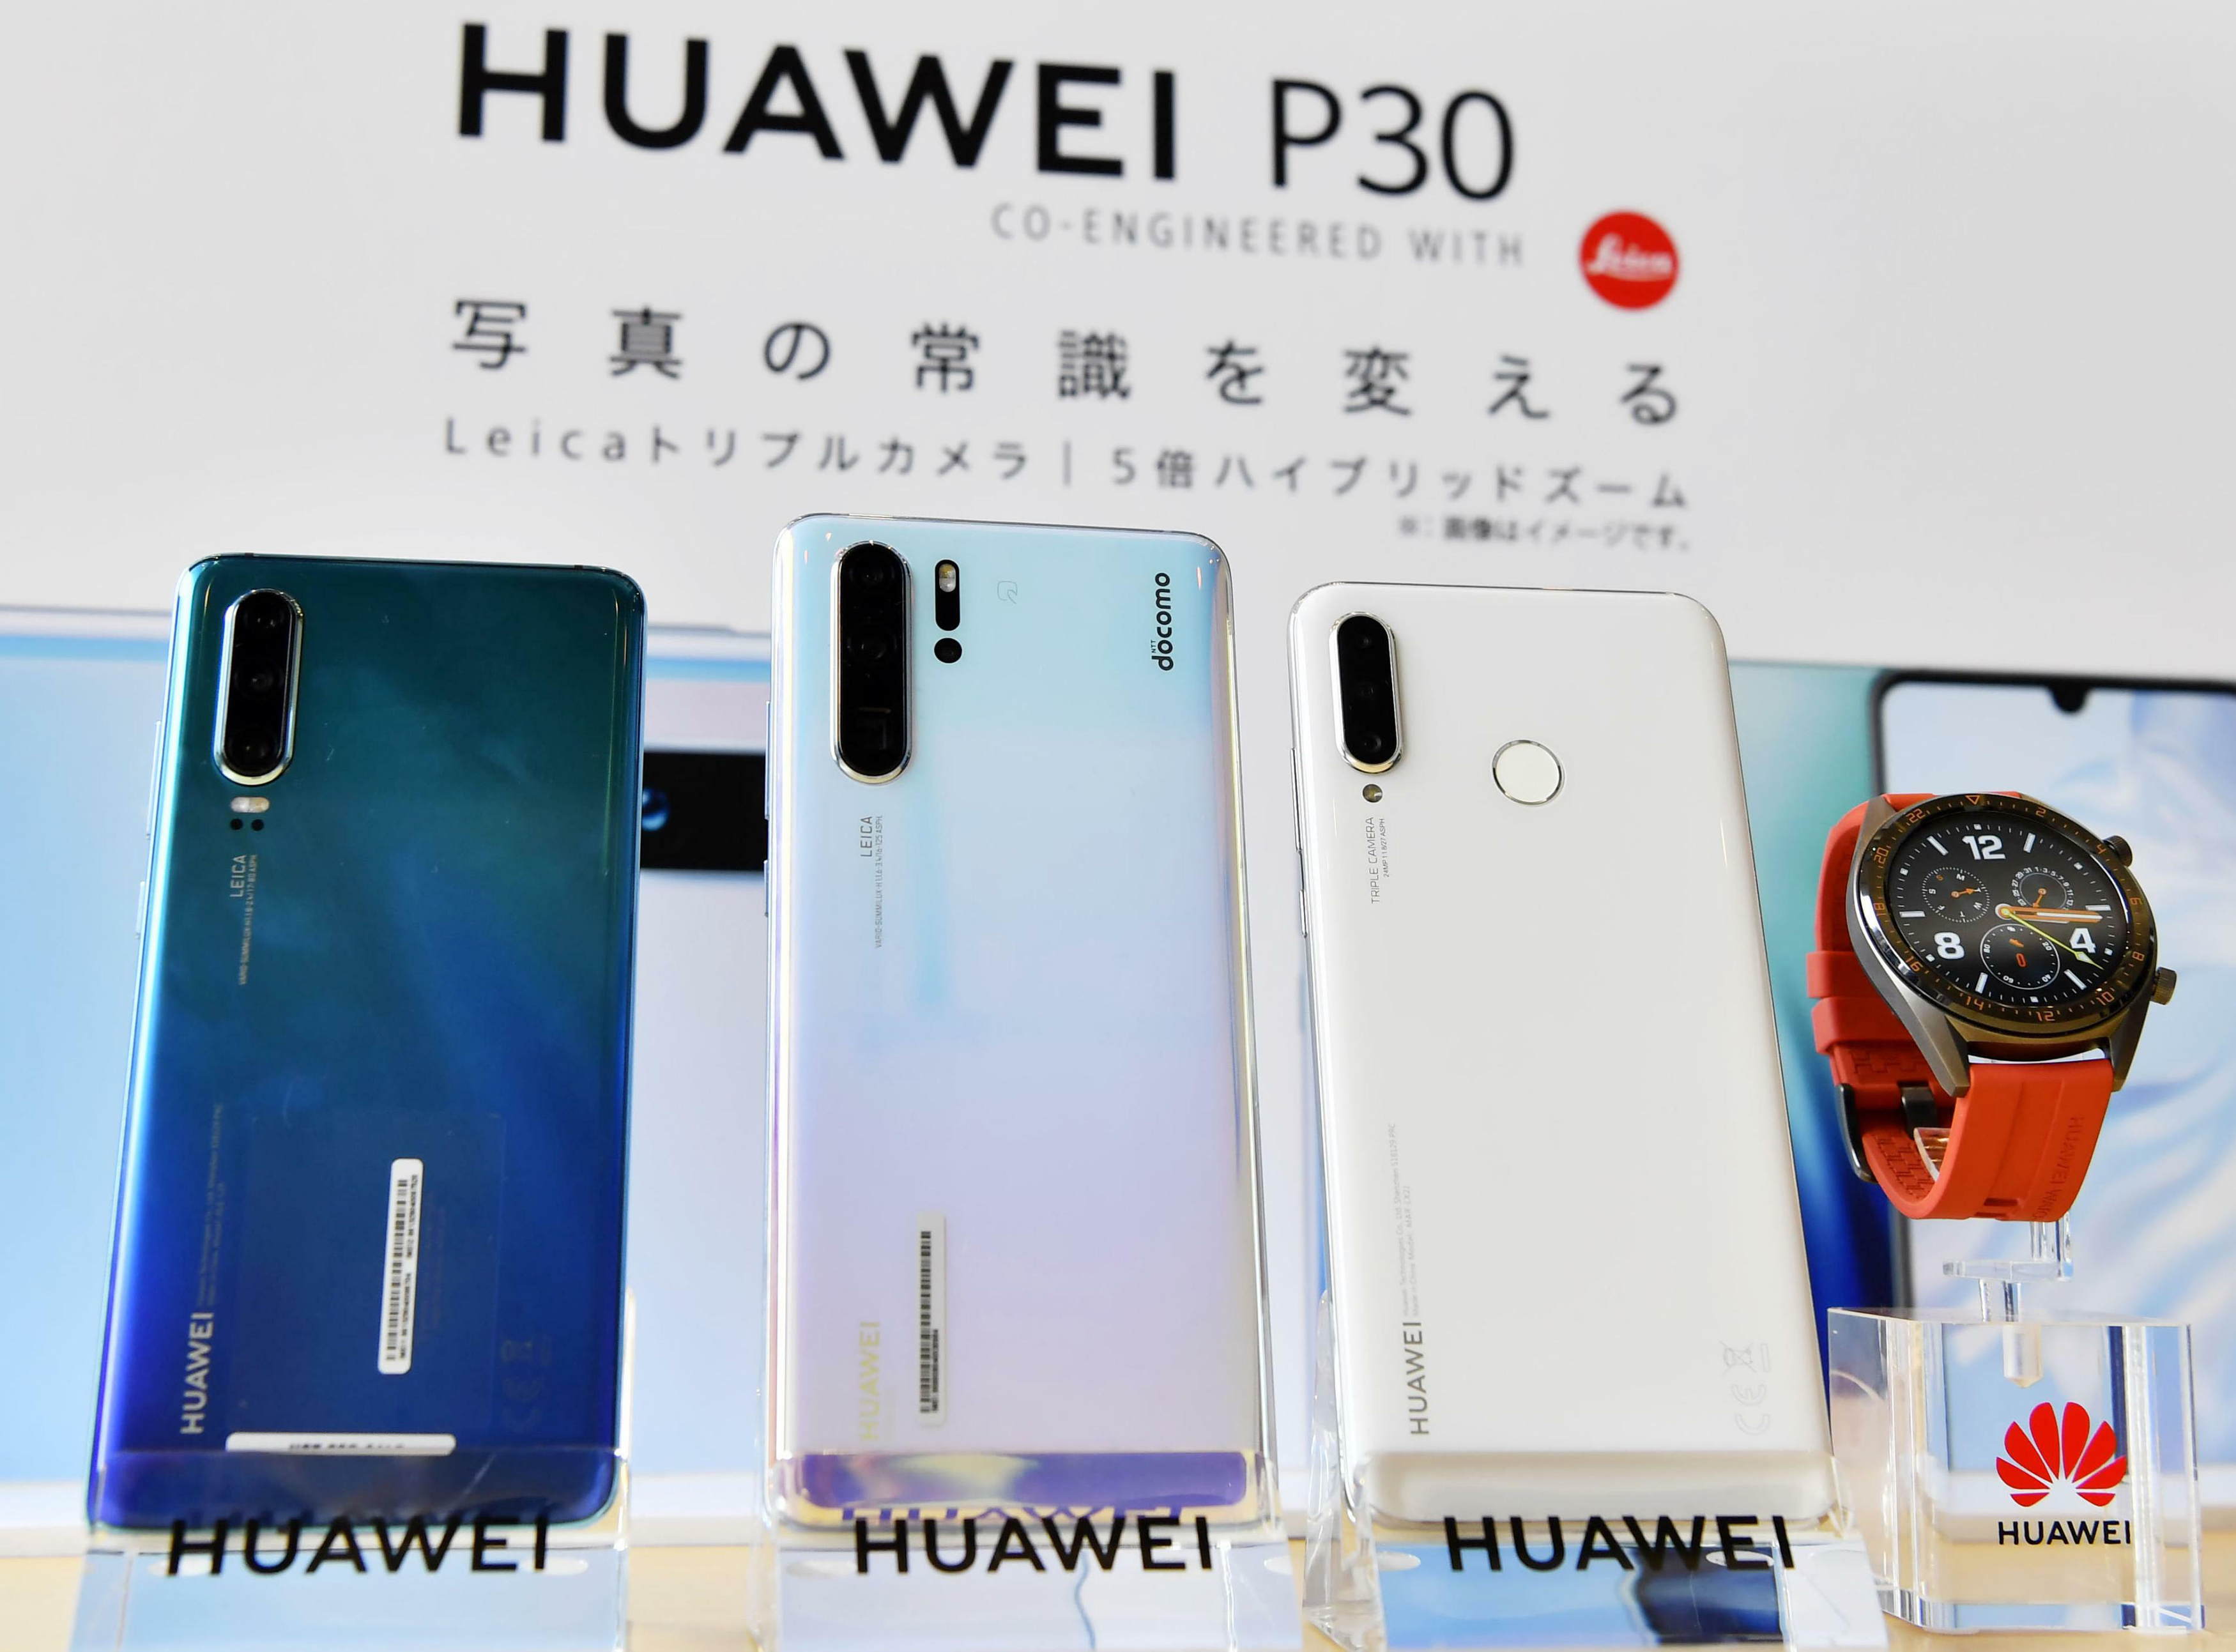 jammer legal nurse firms , UK, Japan Mobile Operators Suspend Huawei 5G Phone Launches